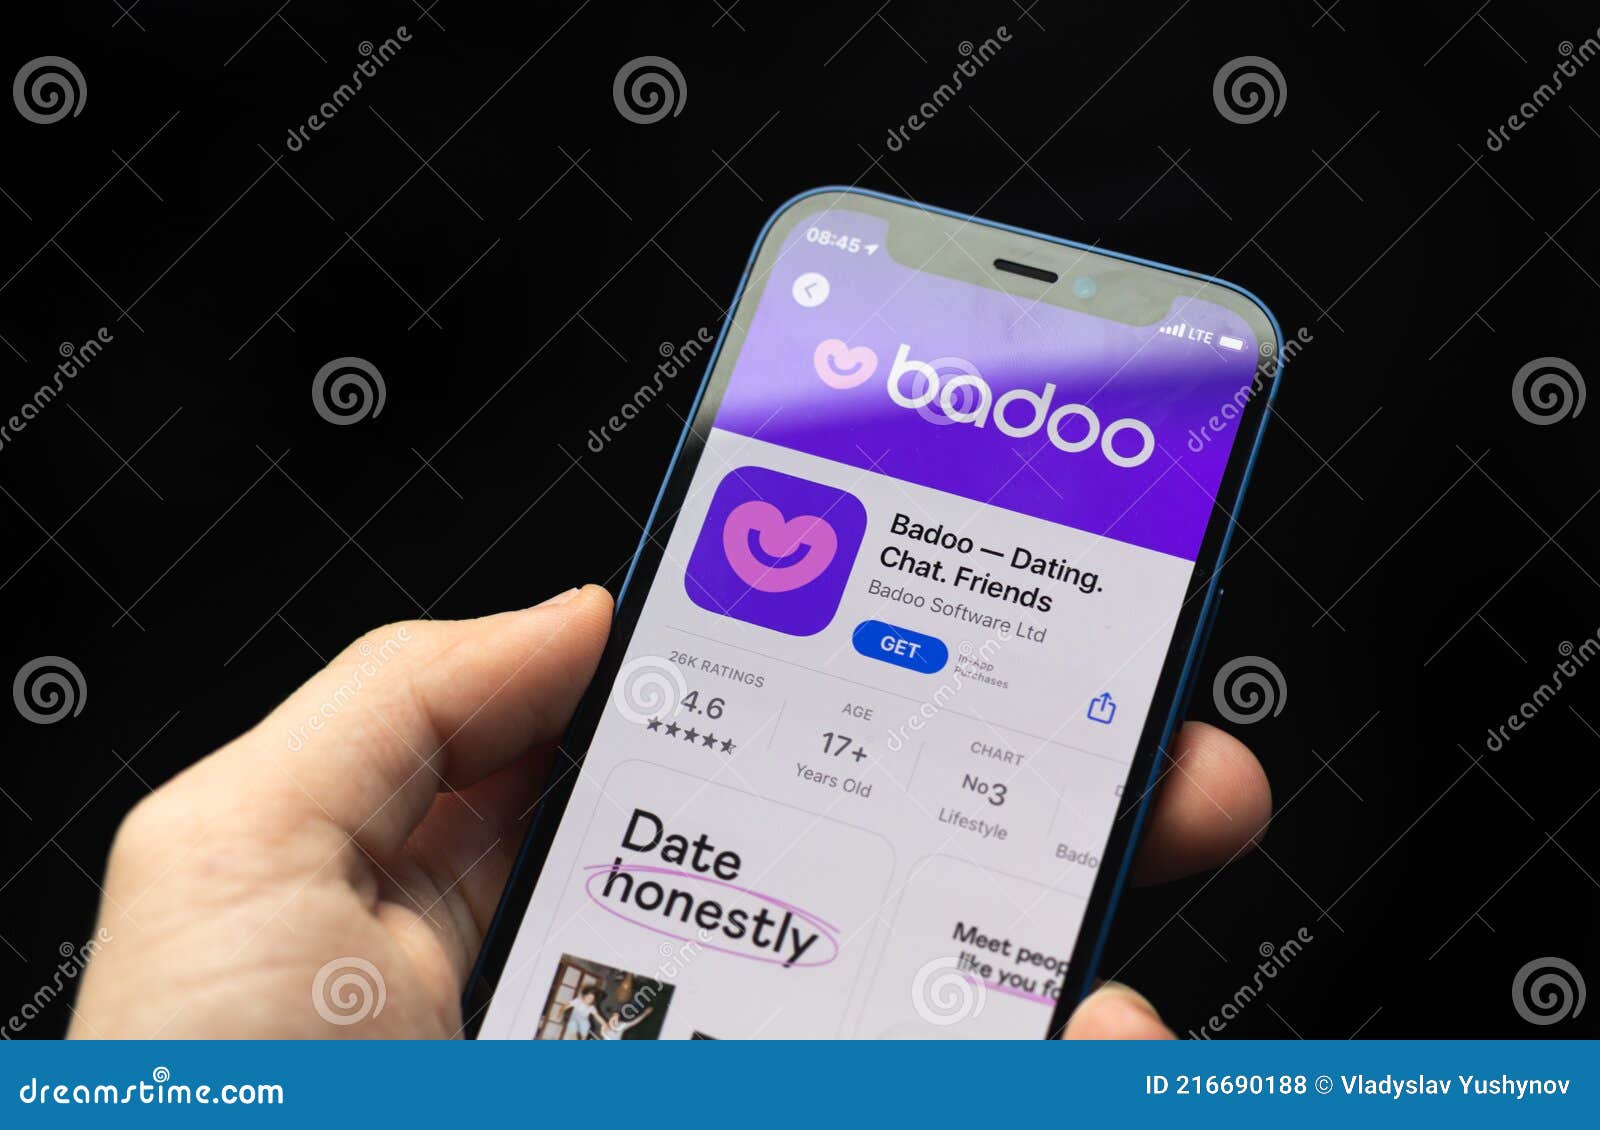 Seen you online are badoo when How To